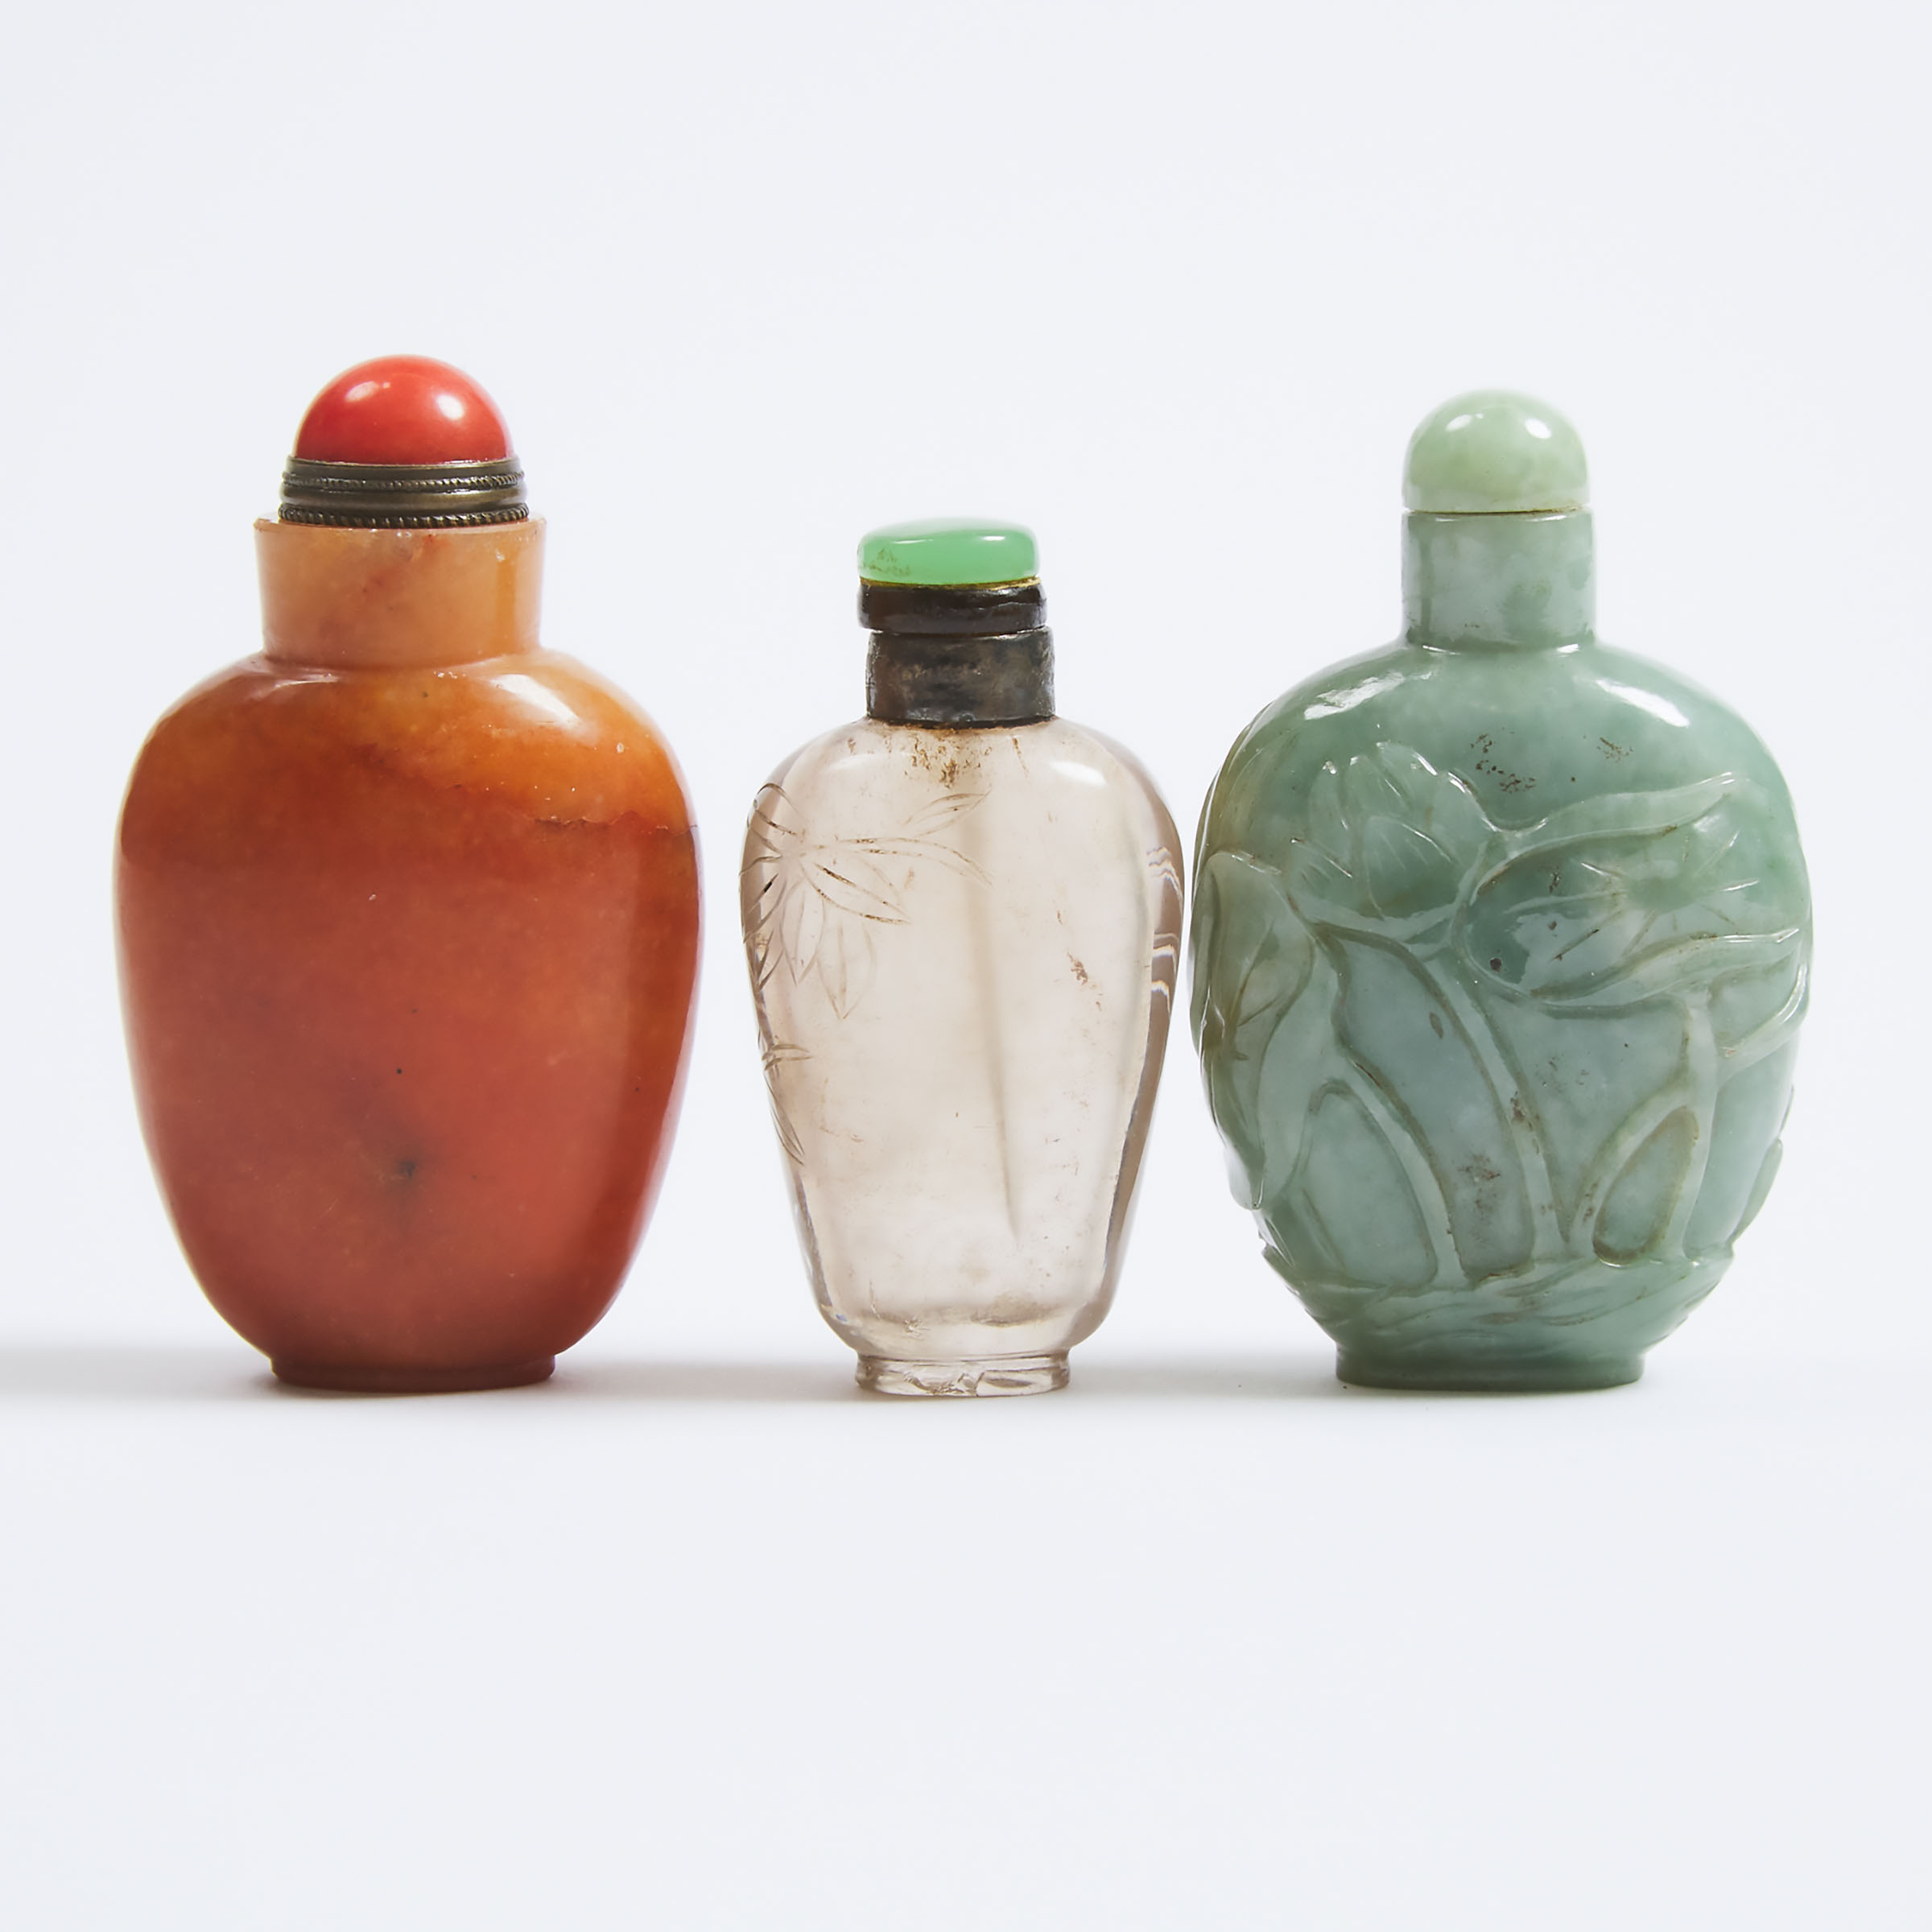 A Group of Three Agate, Jadeite, and Smoky Quartz Snuff Bottles, Republican Period, Early 20th Century